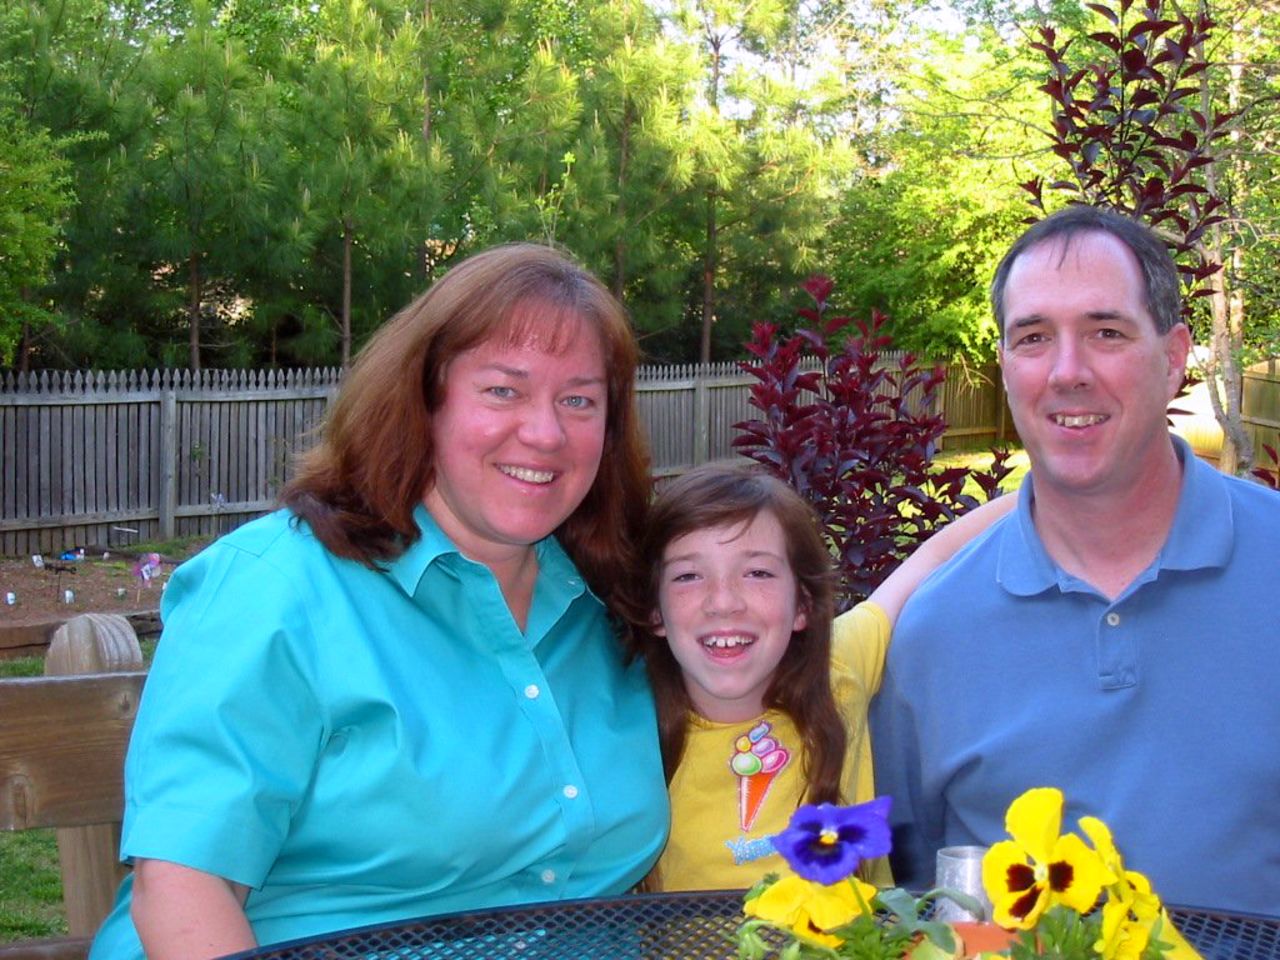 Self-described emotional eater Charmaine Jackson, here with her daughter, Caroline, and husband, Kelly, in 2004, weighed 230 pounds at the time and was on her way to a high of 260. Click through to see her weight loss transformation after she began to keep track of her eating habits through daily journaling: